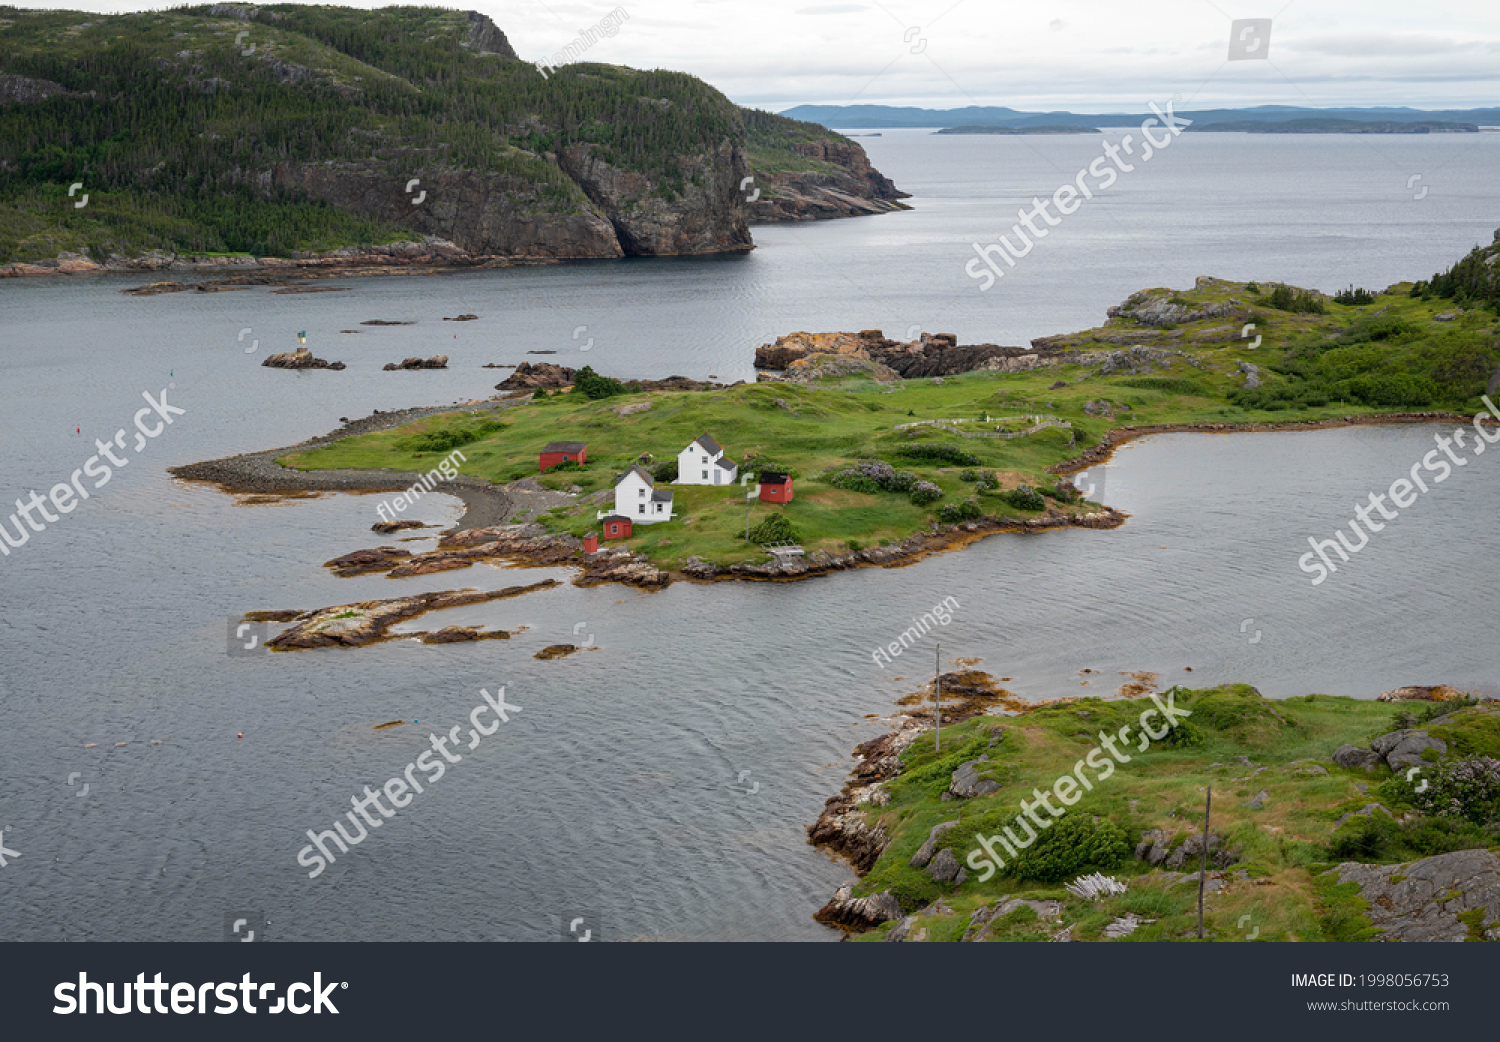 Beautiful coastal fishing town of Salvage, Newfoundland. On the northern part of the island. Several traditional wooden saltbox houses on a peninsula in the ocean. #1998056753